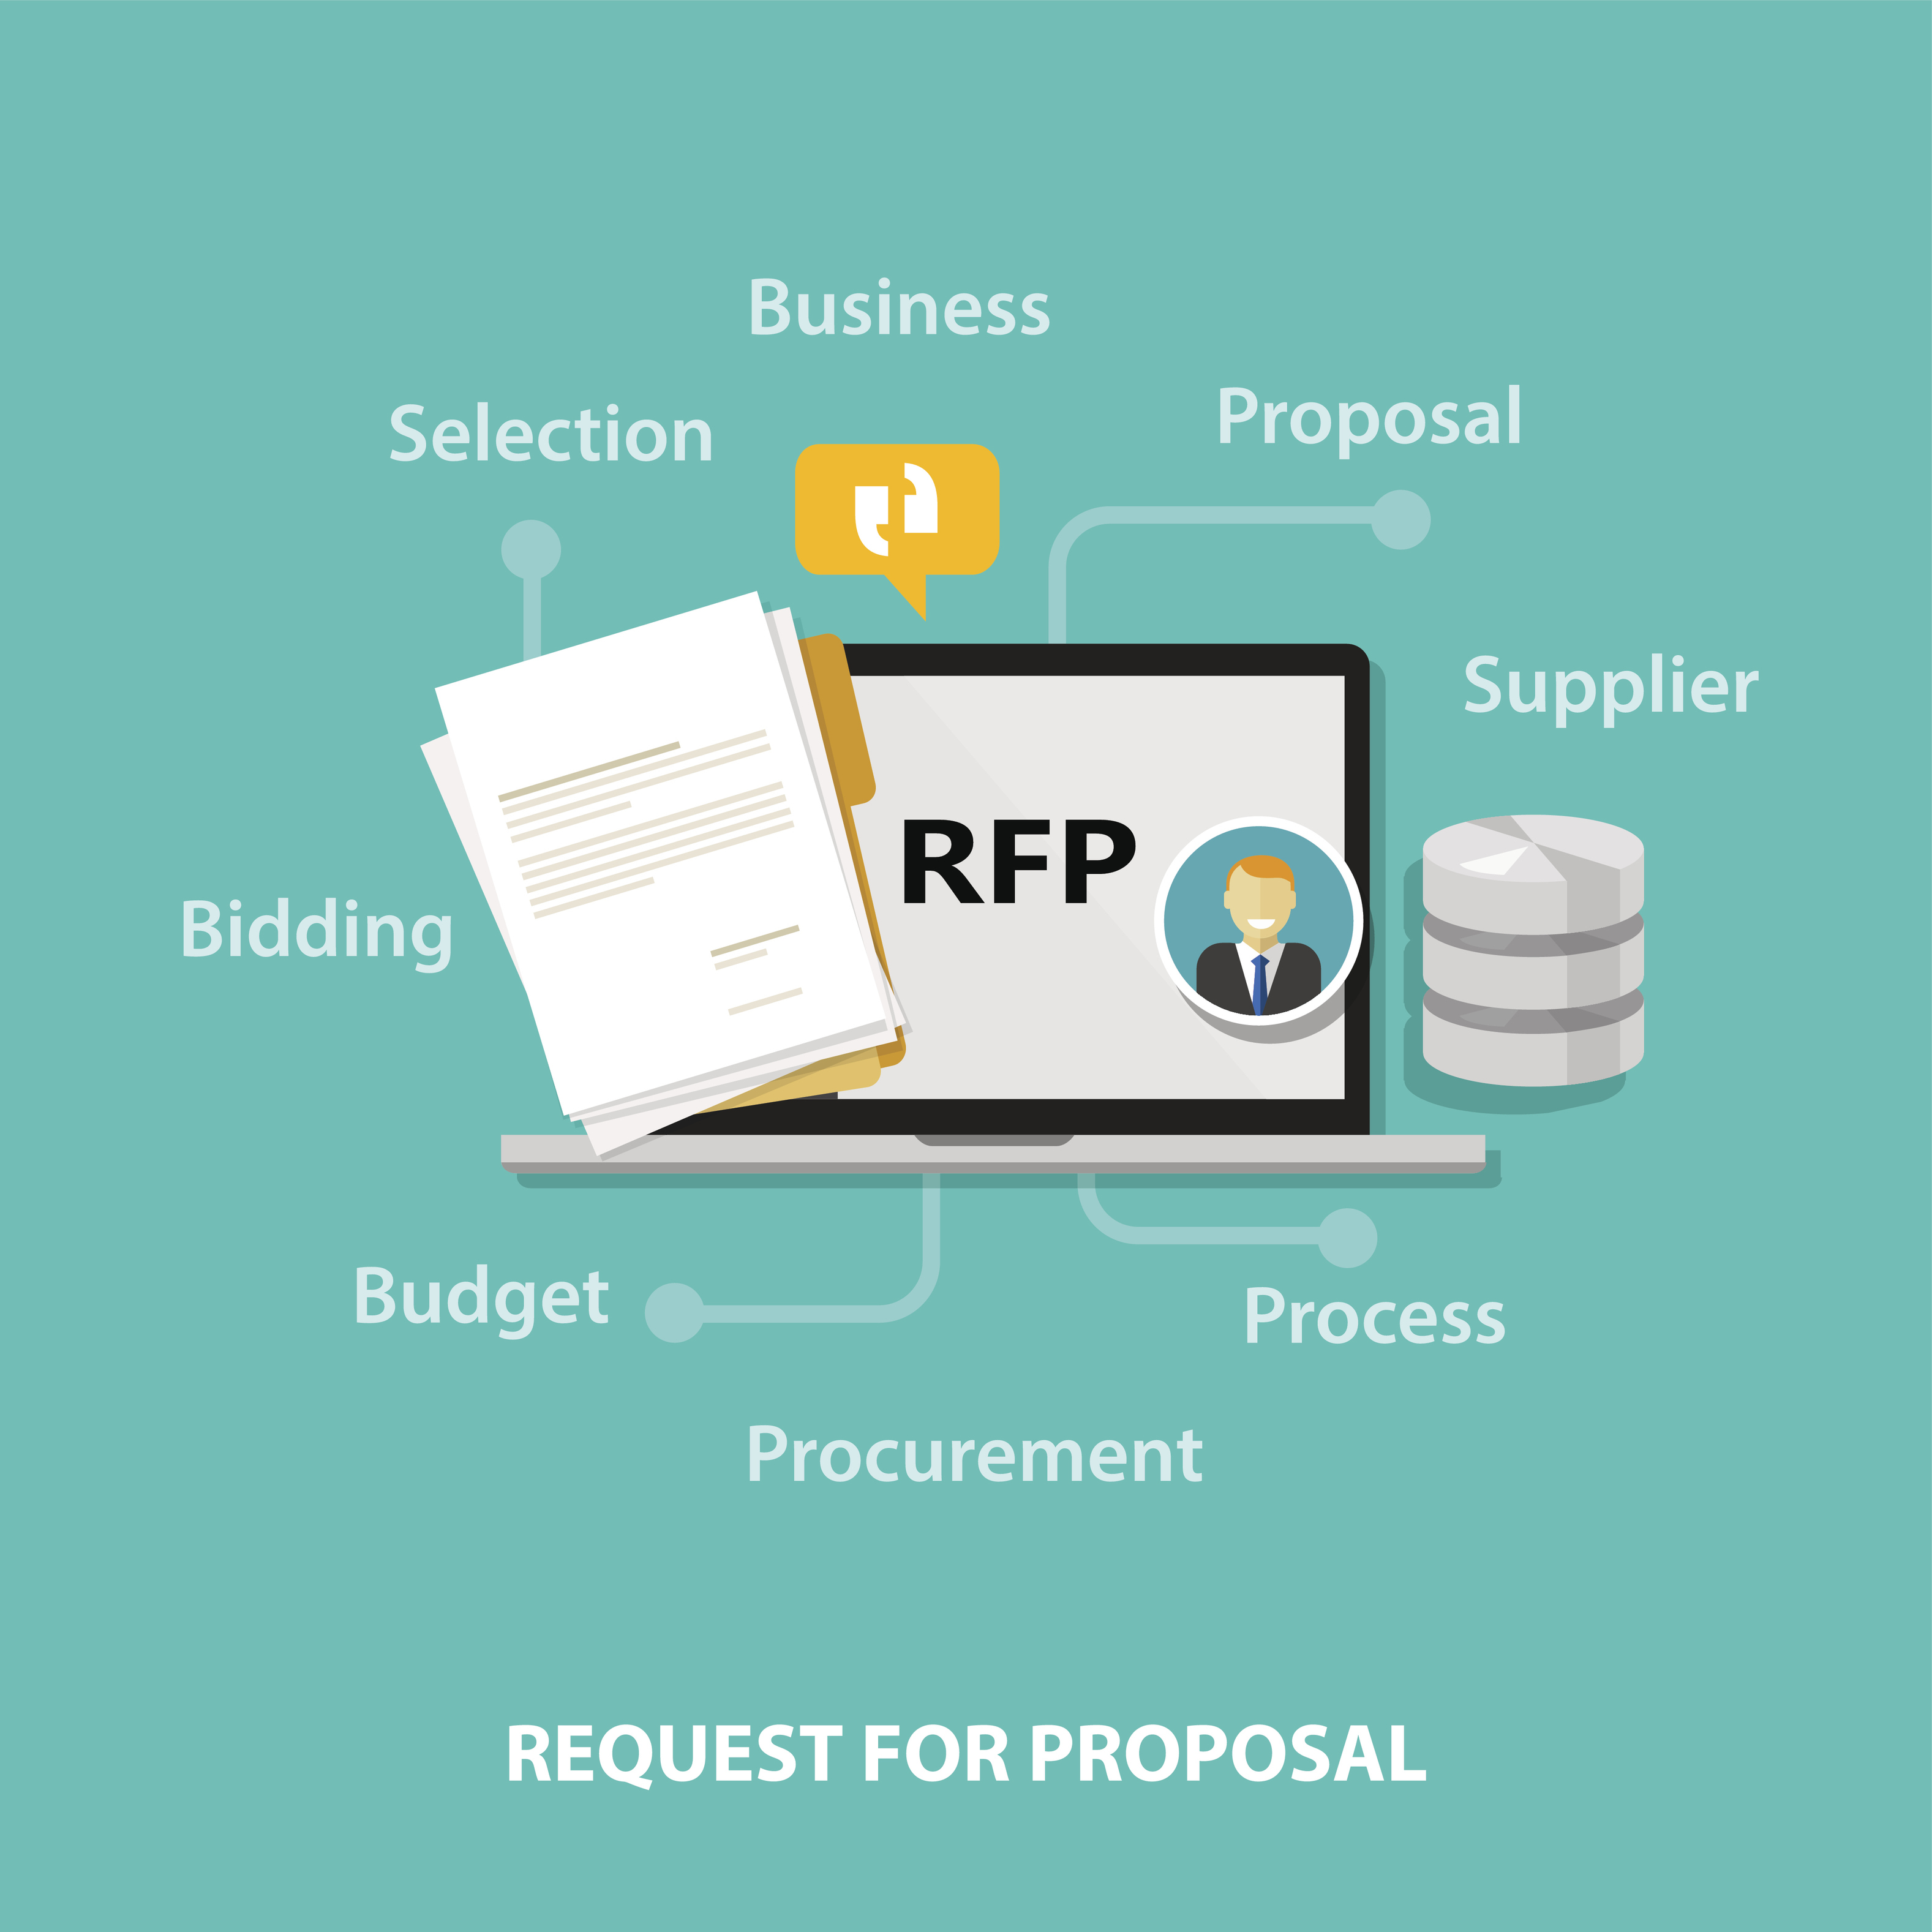 RFP request for proposal icon illustration vector bidding procurement process drawing